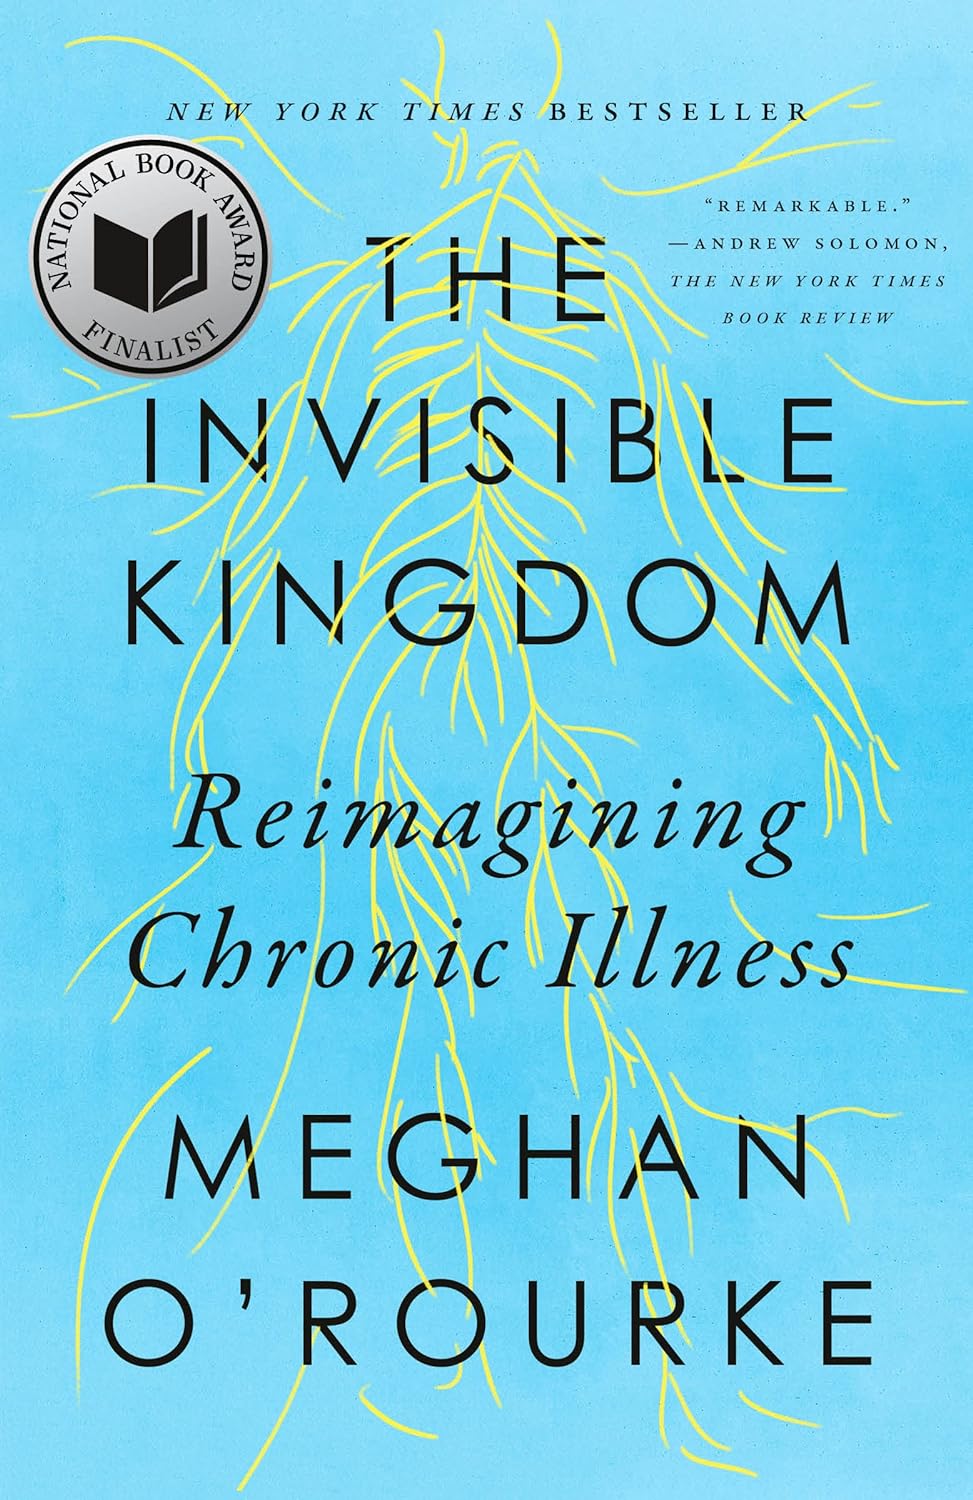 Image for "The Invisible Kingdom: Reimagining Chronic Illness"